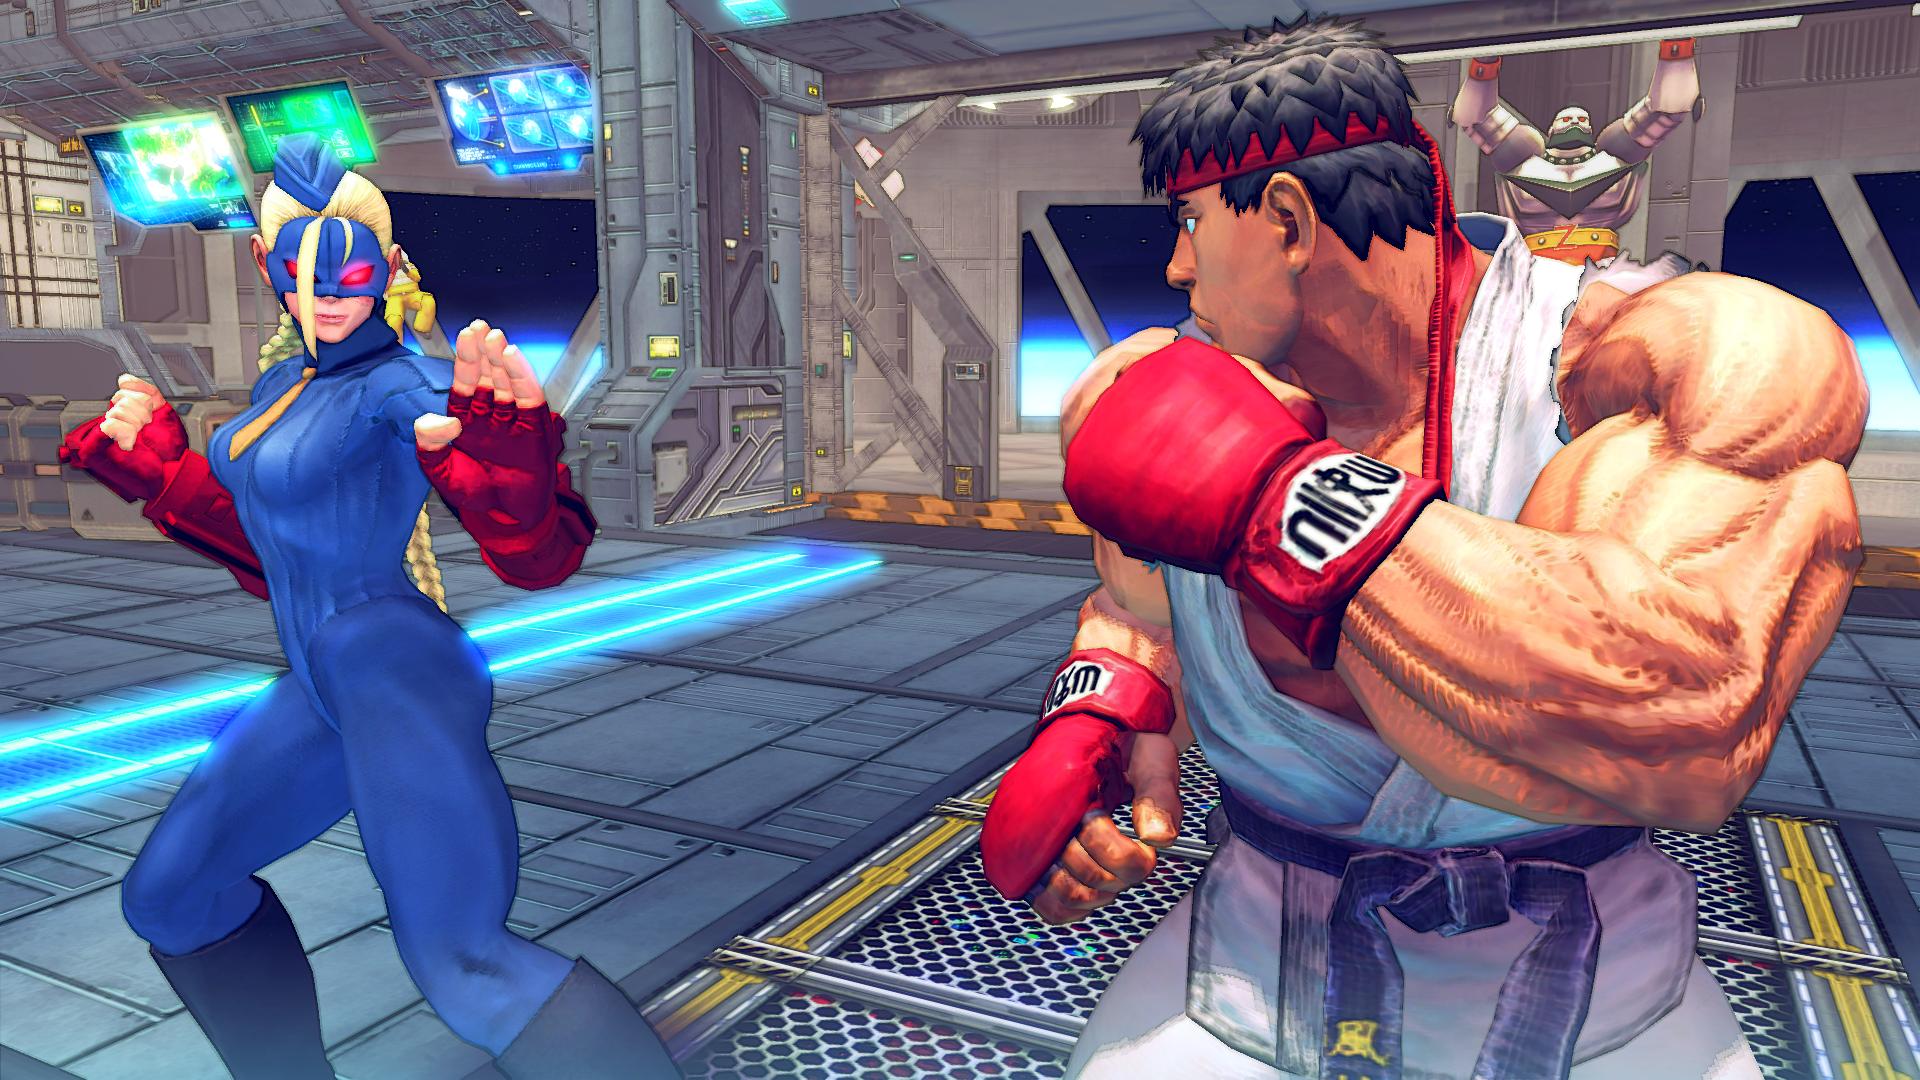 Ultra Street Fighter IV Backgrounds, Compatible - PC, Mobile, Gadgets| 1920x1080 px